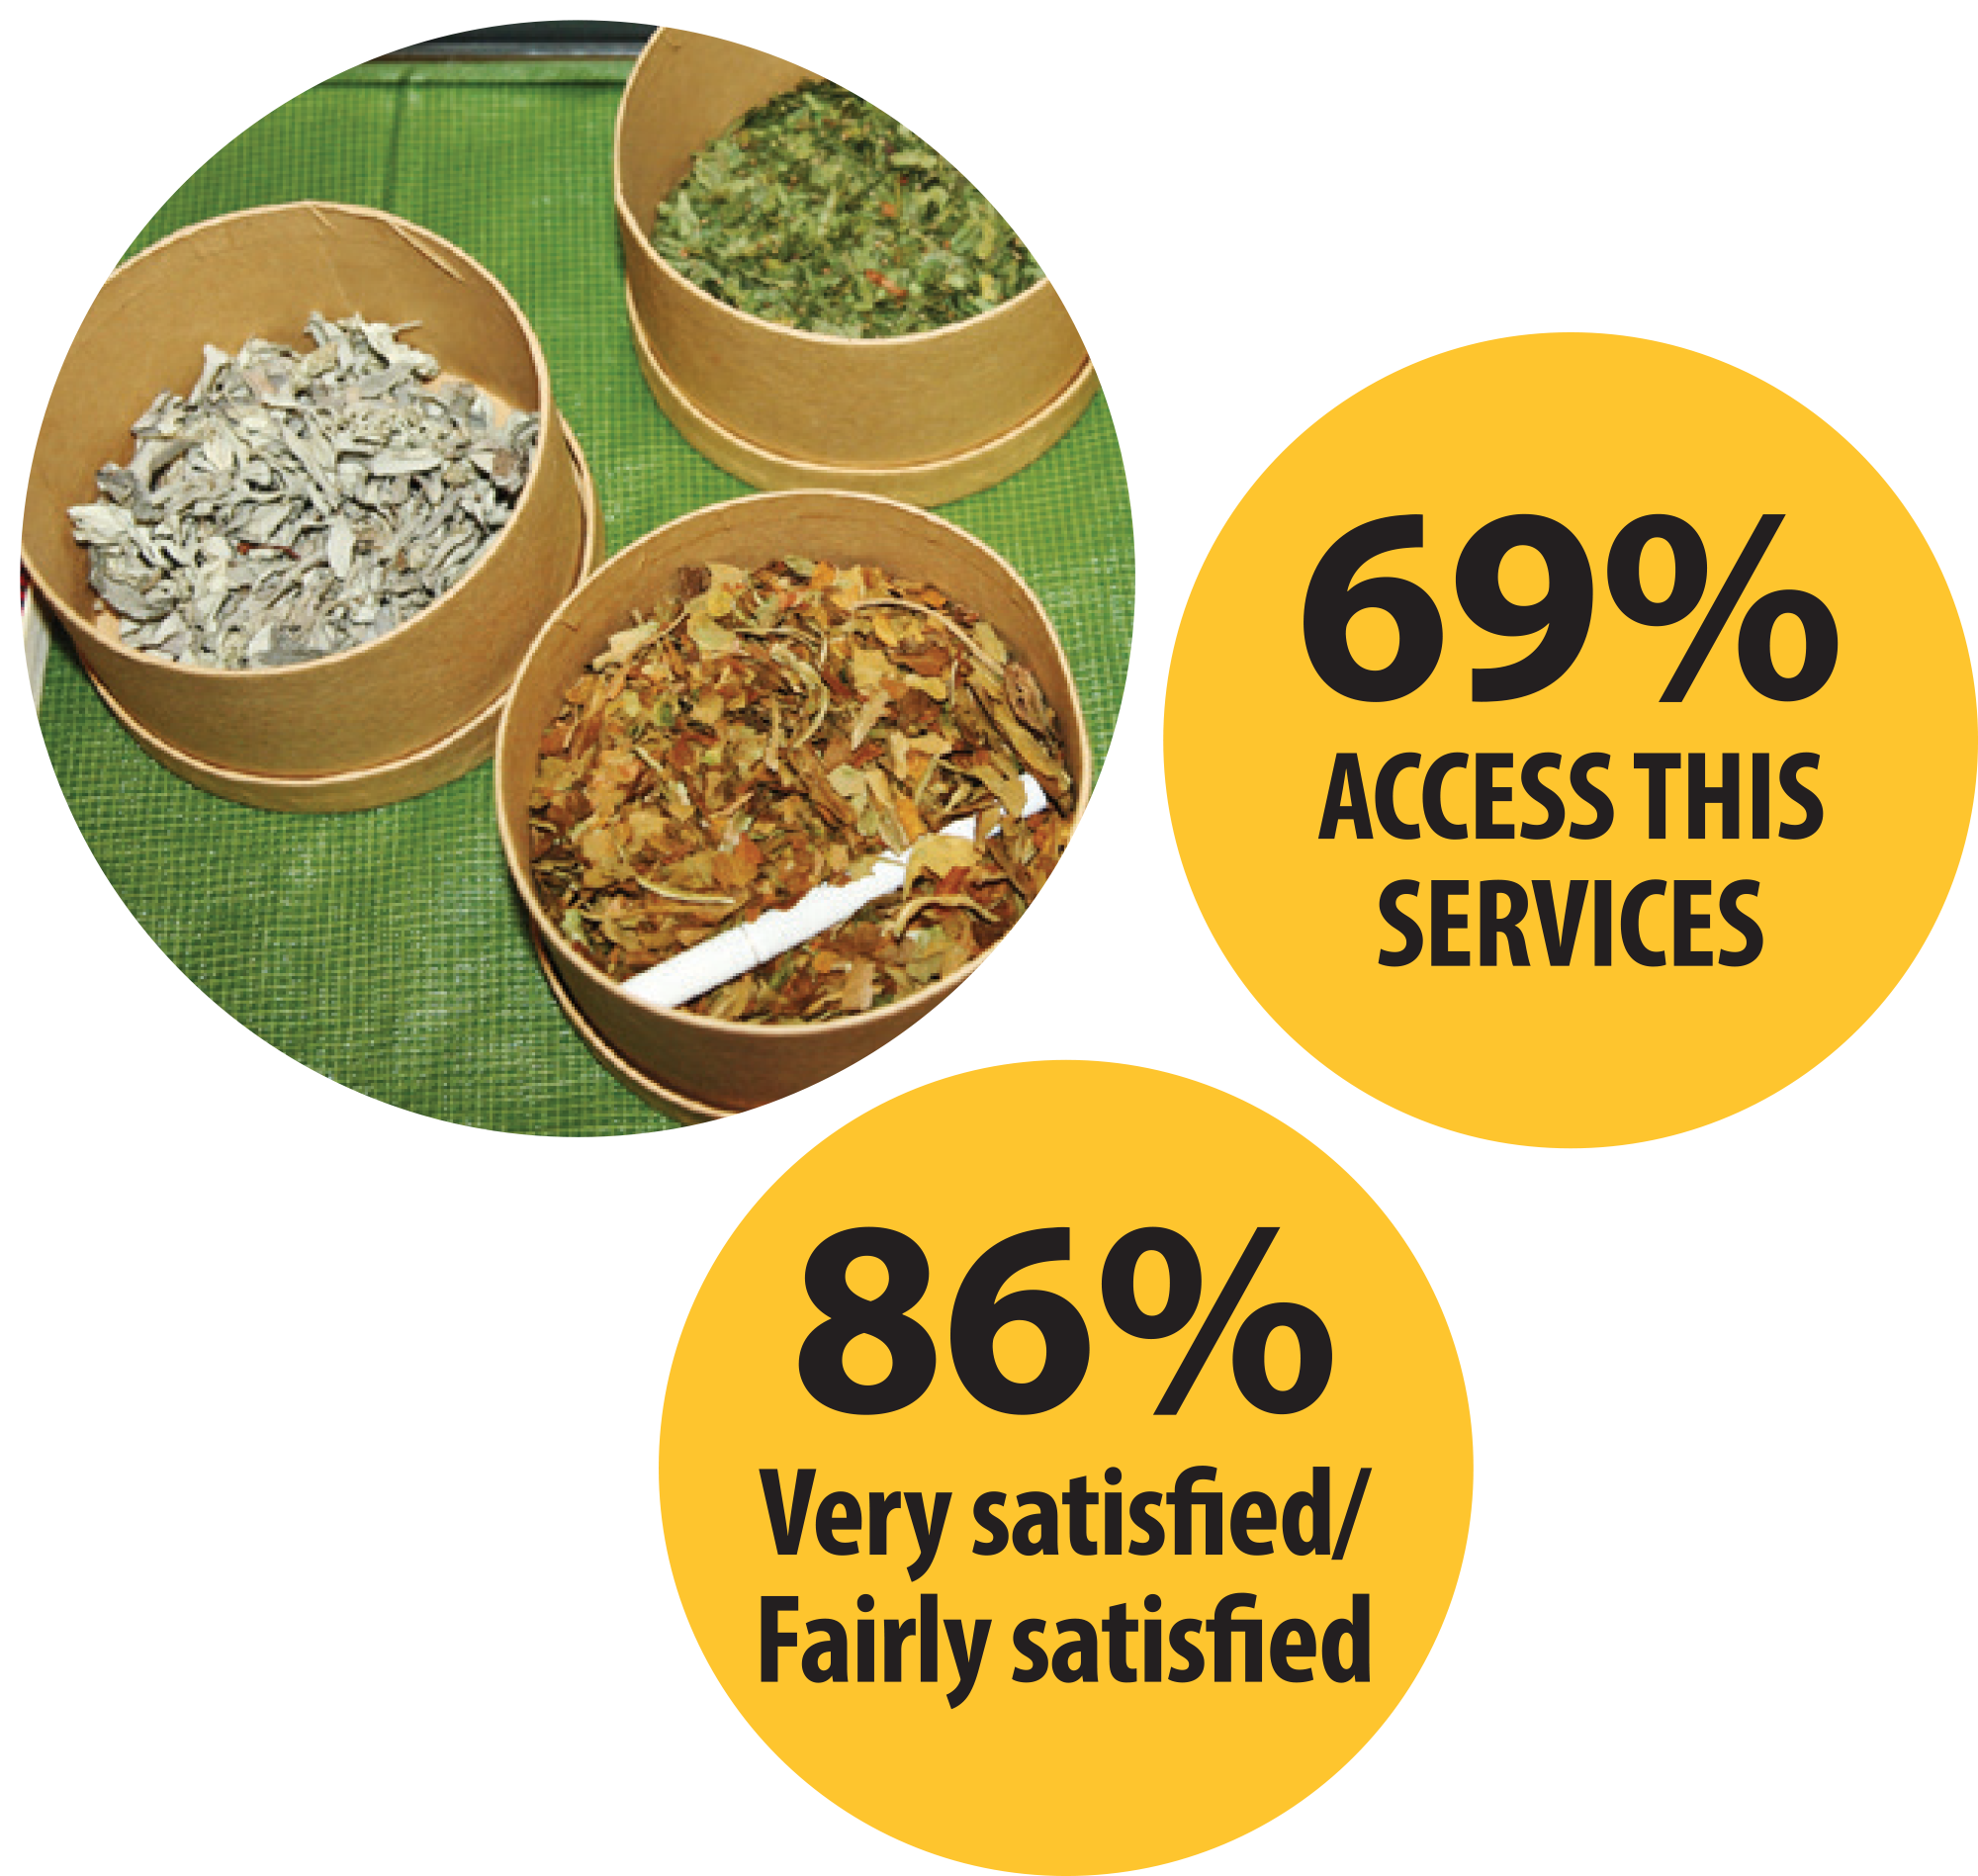 69% Access this services | 86% Very satisfied/Fairly satisfied